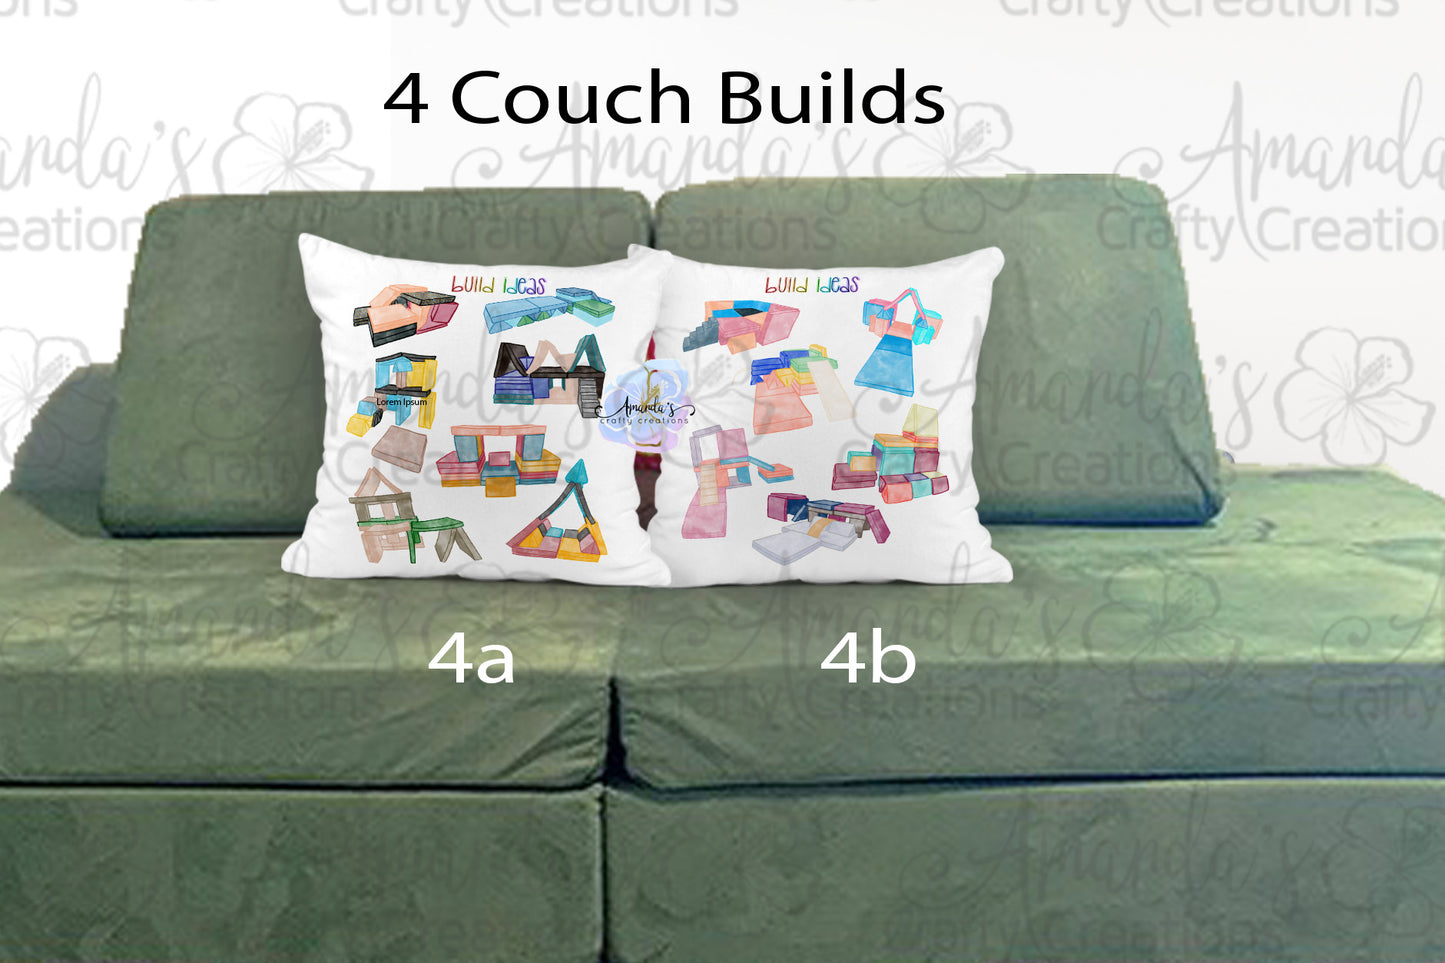 Customizable Play Couch configuration pillow case, watercolor image, play couch uses, pillow case for play room, playroom decor